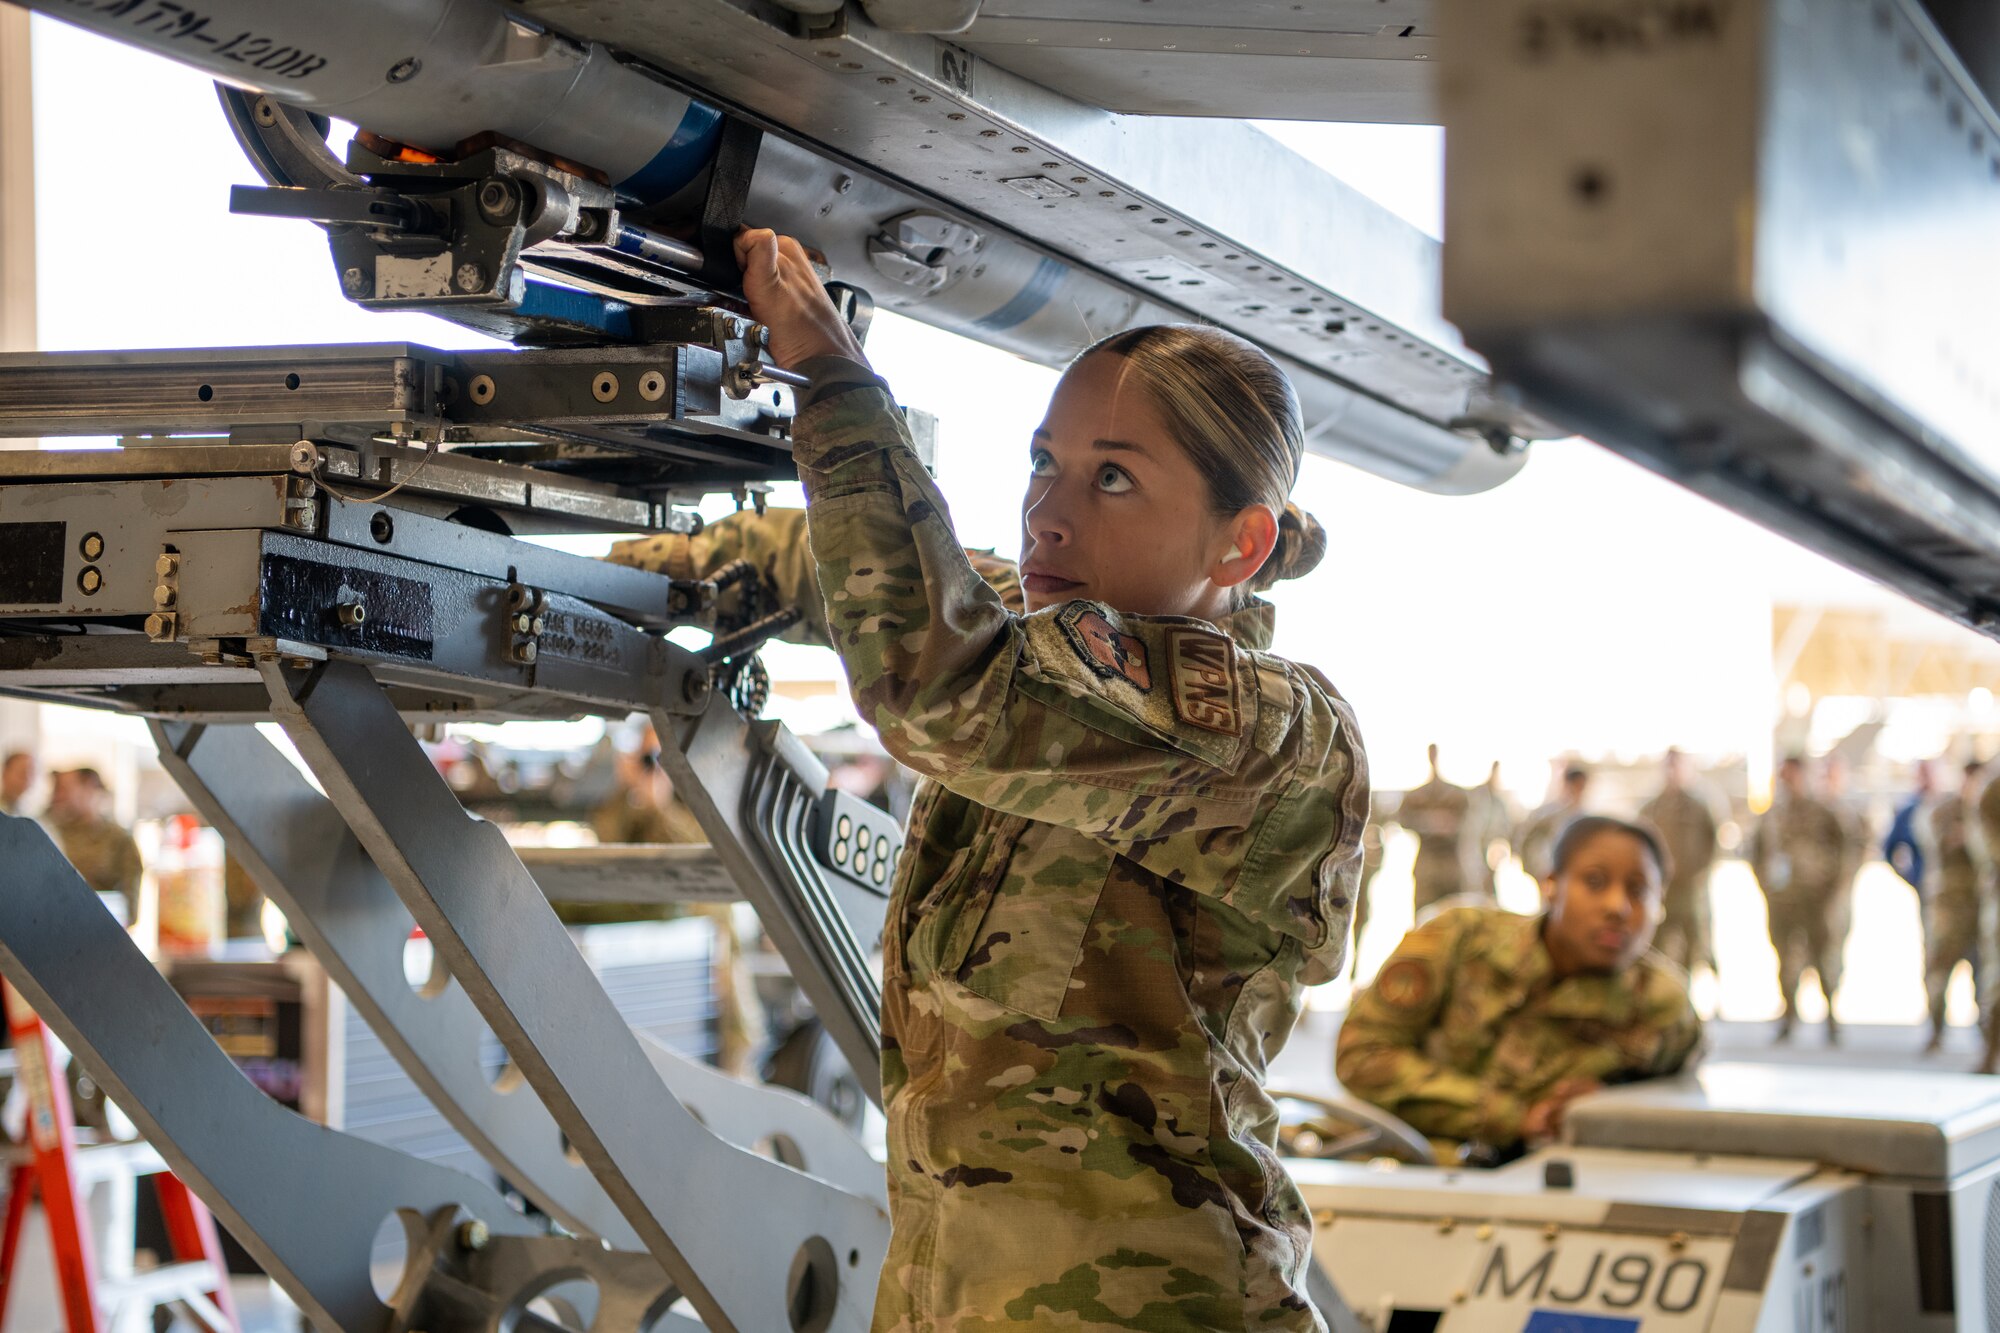 Staff Sgt. Quinn Ball, 310th Aircraft Maintenance Unit weapons load crew chief, loads munitions onto an F-16D Fighting Falcon during the Women of Weapons Load Exhibition March 11, 2022, at Luke Air Force Base, Arizona. The event was held in celebration of Women’s History Month to exemplify a culture of diversity and inclusion across the 56th Maintenance Group. (U.S. Air Force photo by Senior Airman Phyllis Jimenez)